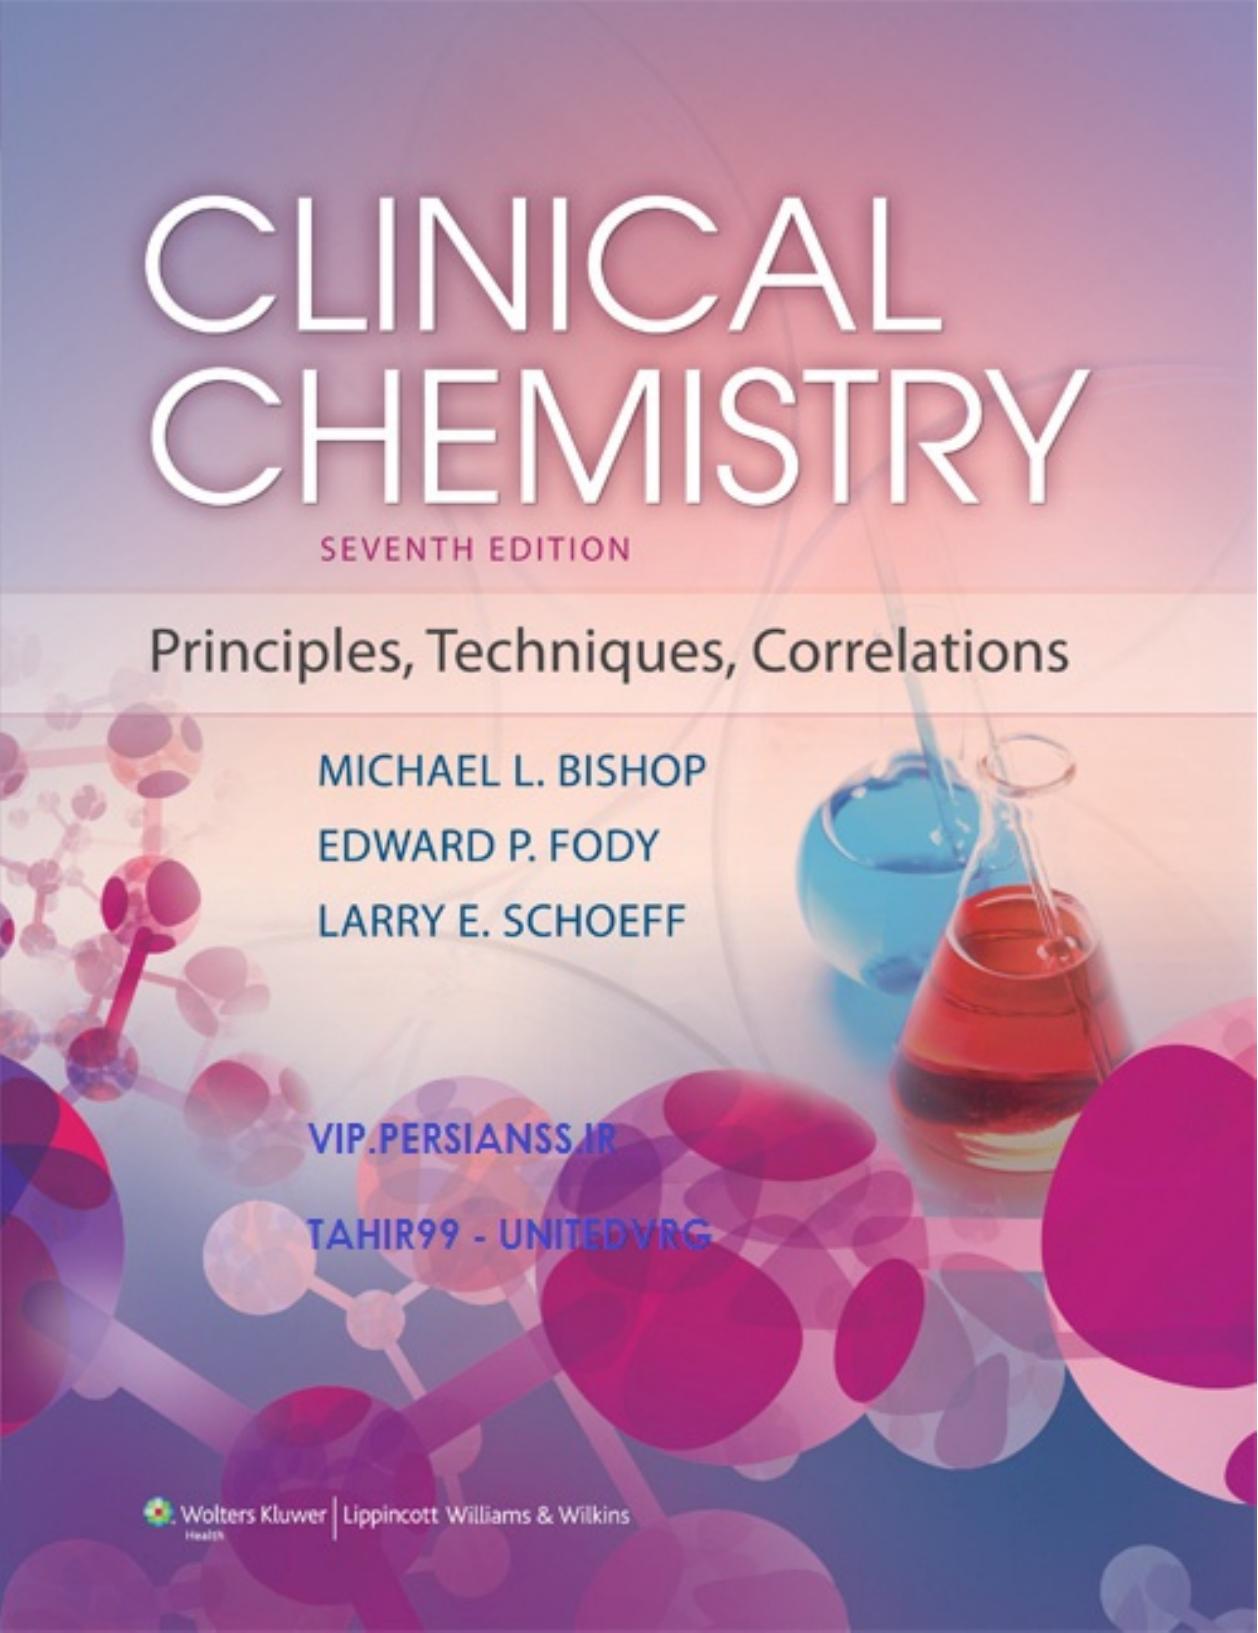 CLINICAL CHEMISTRY: Principles, Techniques, and Correlations, SEVENTH EDITION